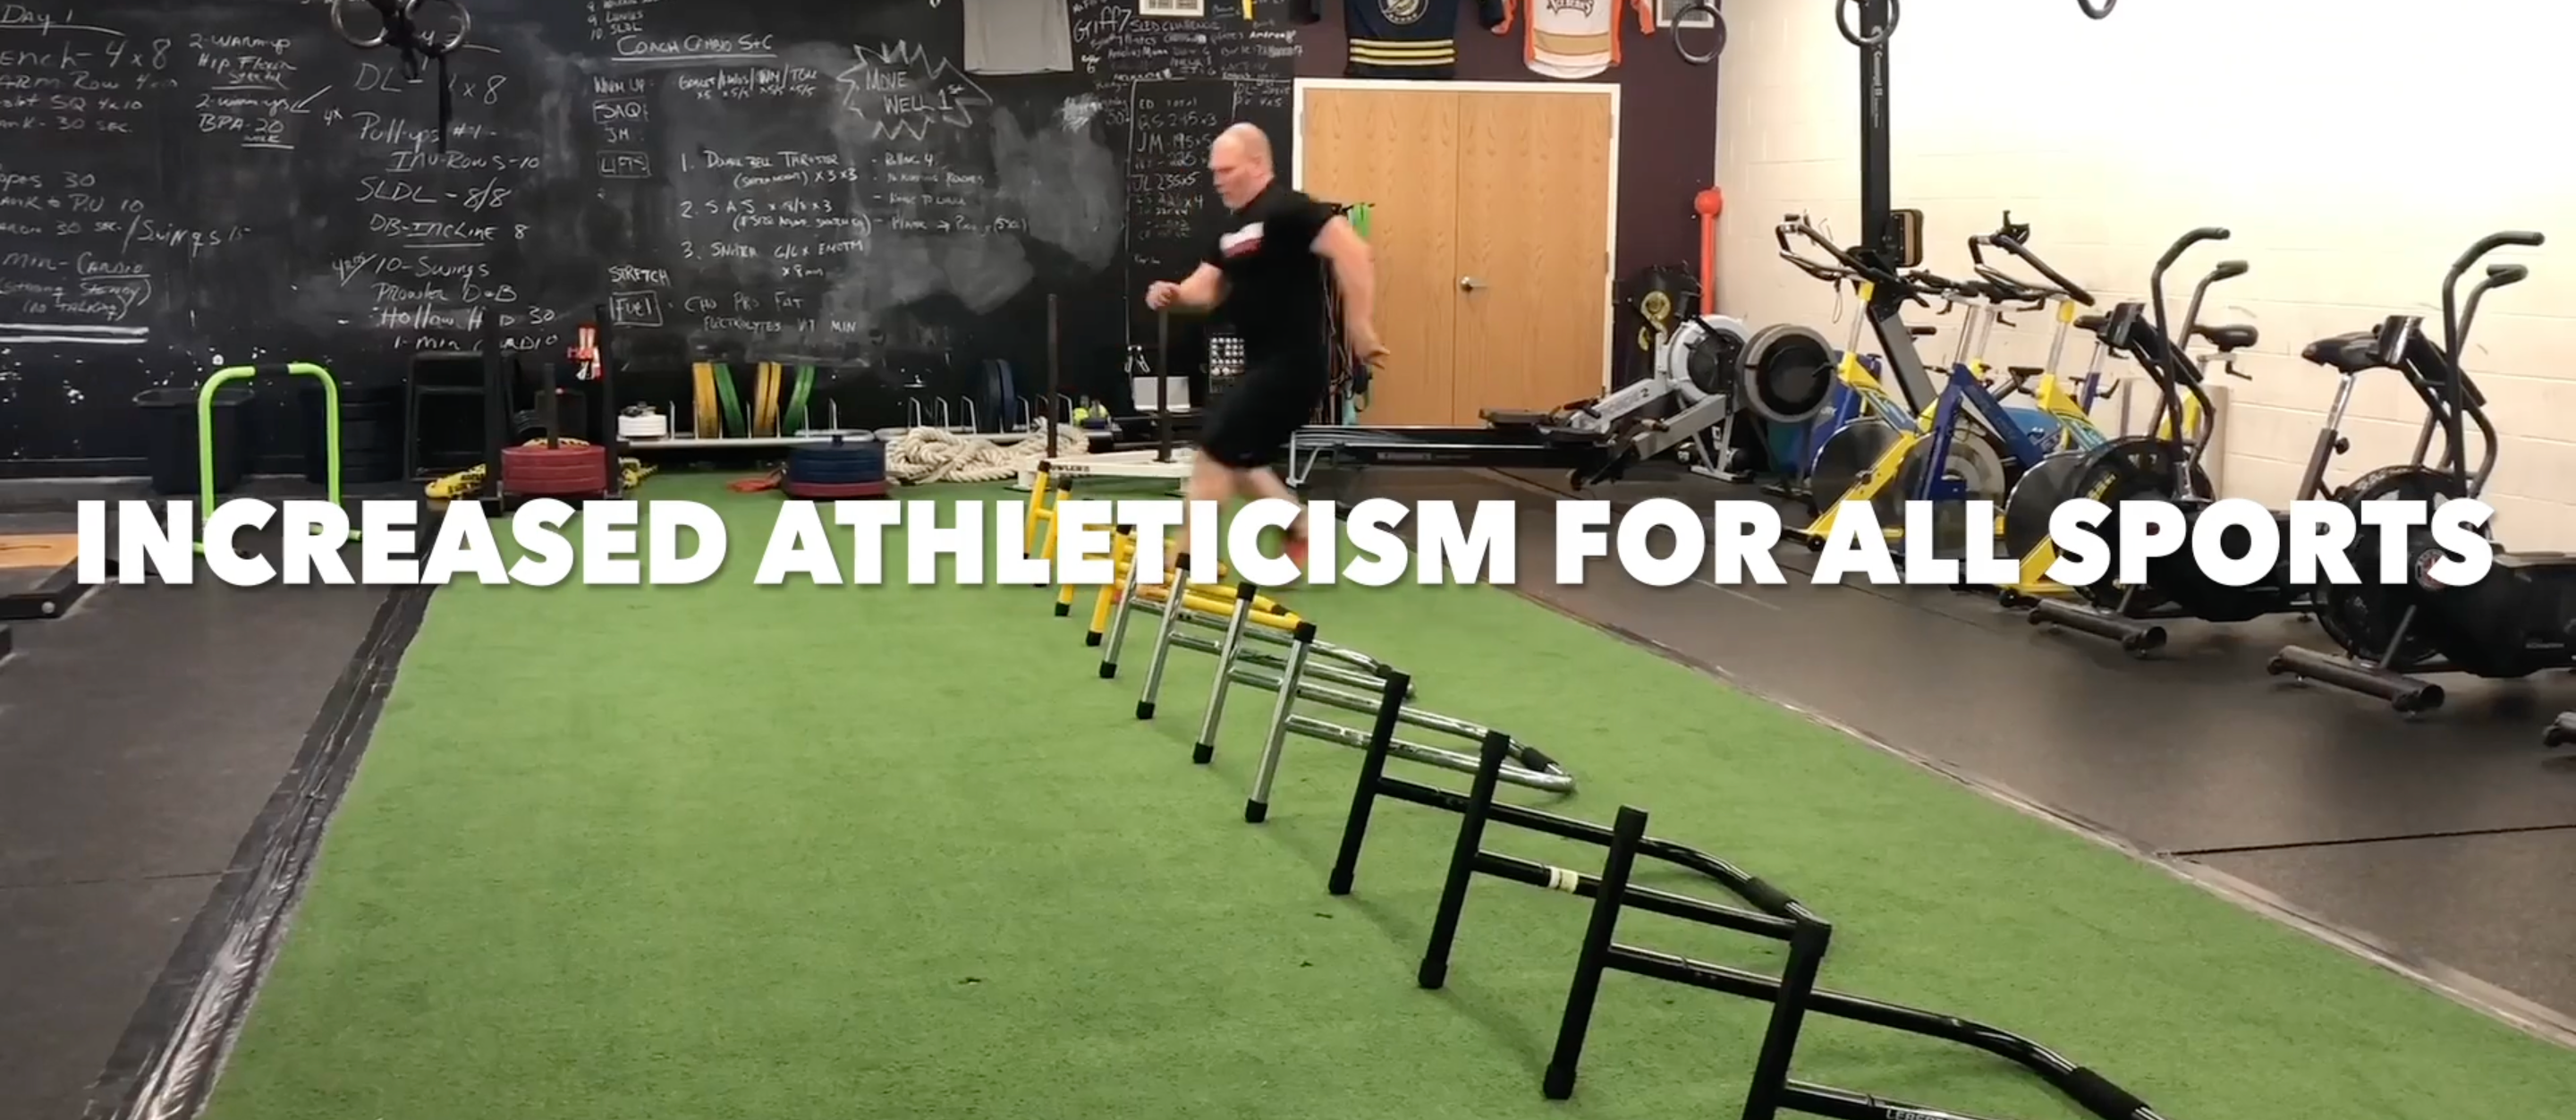 Increased Athleticism for All Sports